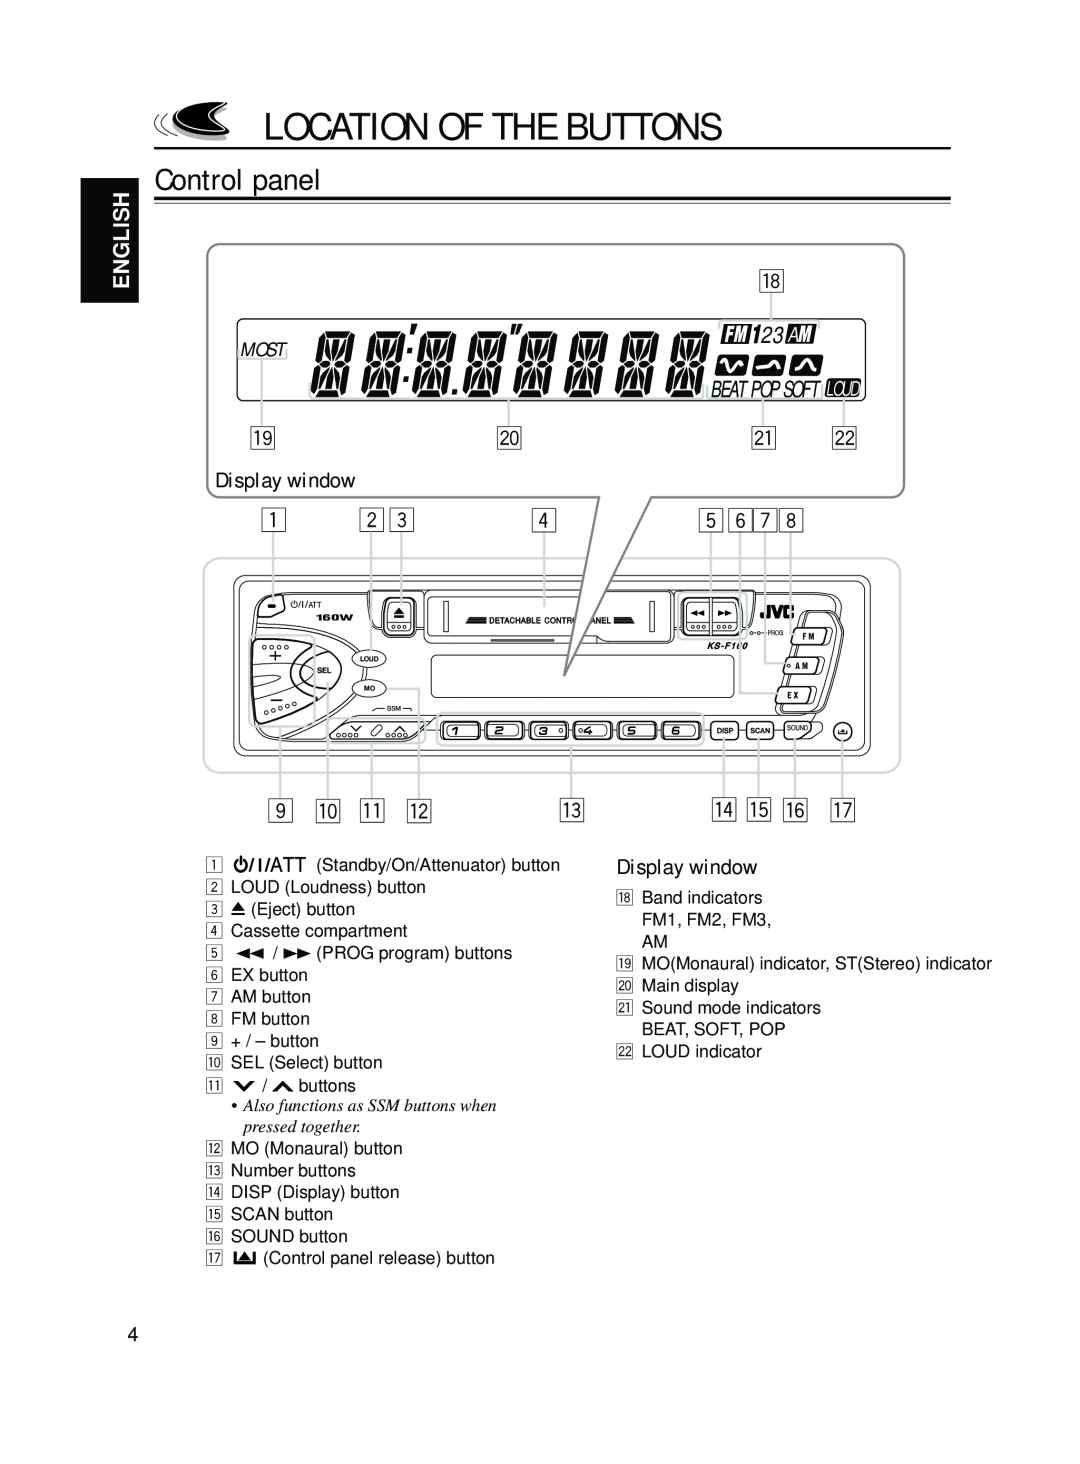 JVC KS-F160 manual Location Of The Buttons, Control panel, Display window, p q w, r t y u, 23 A, English, Most, Pty Tp 